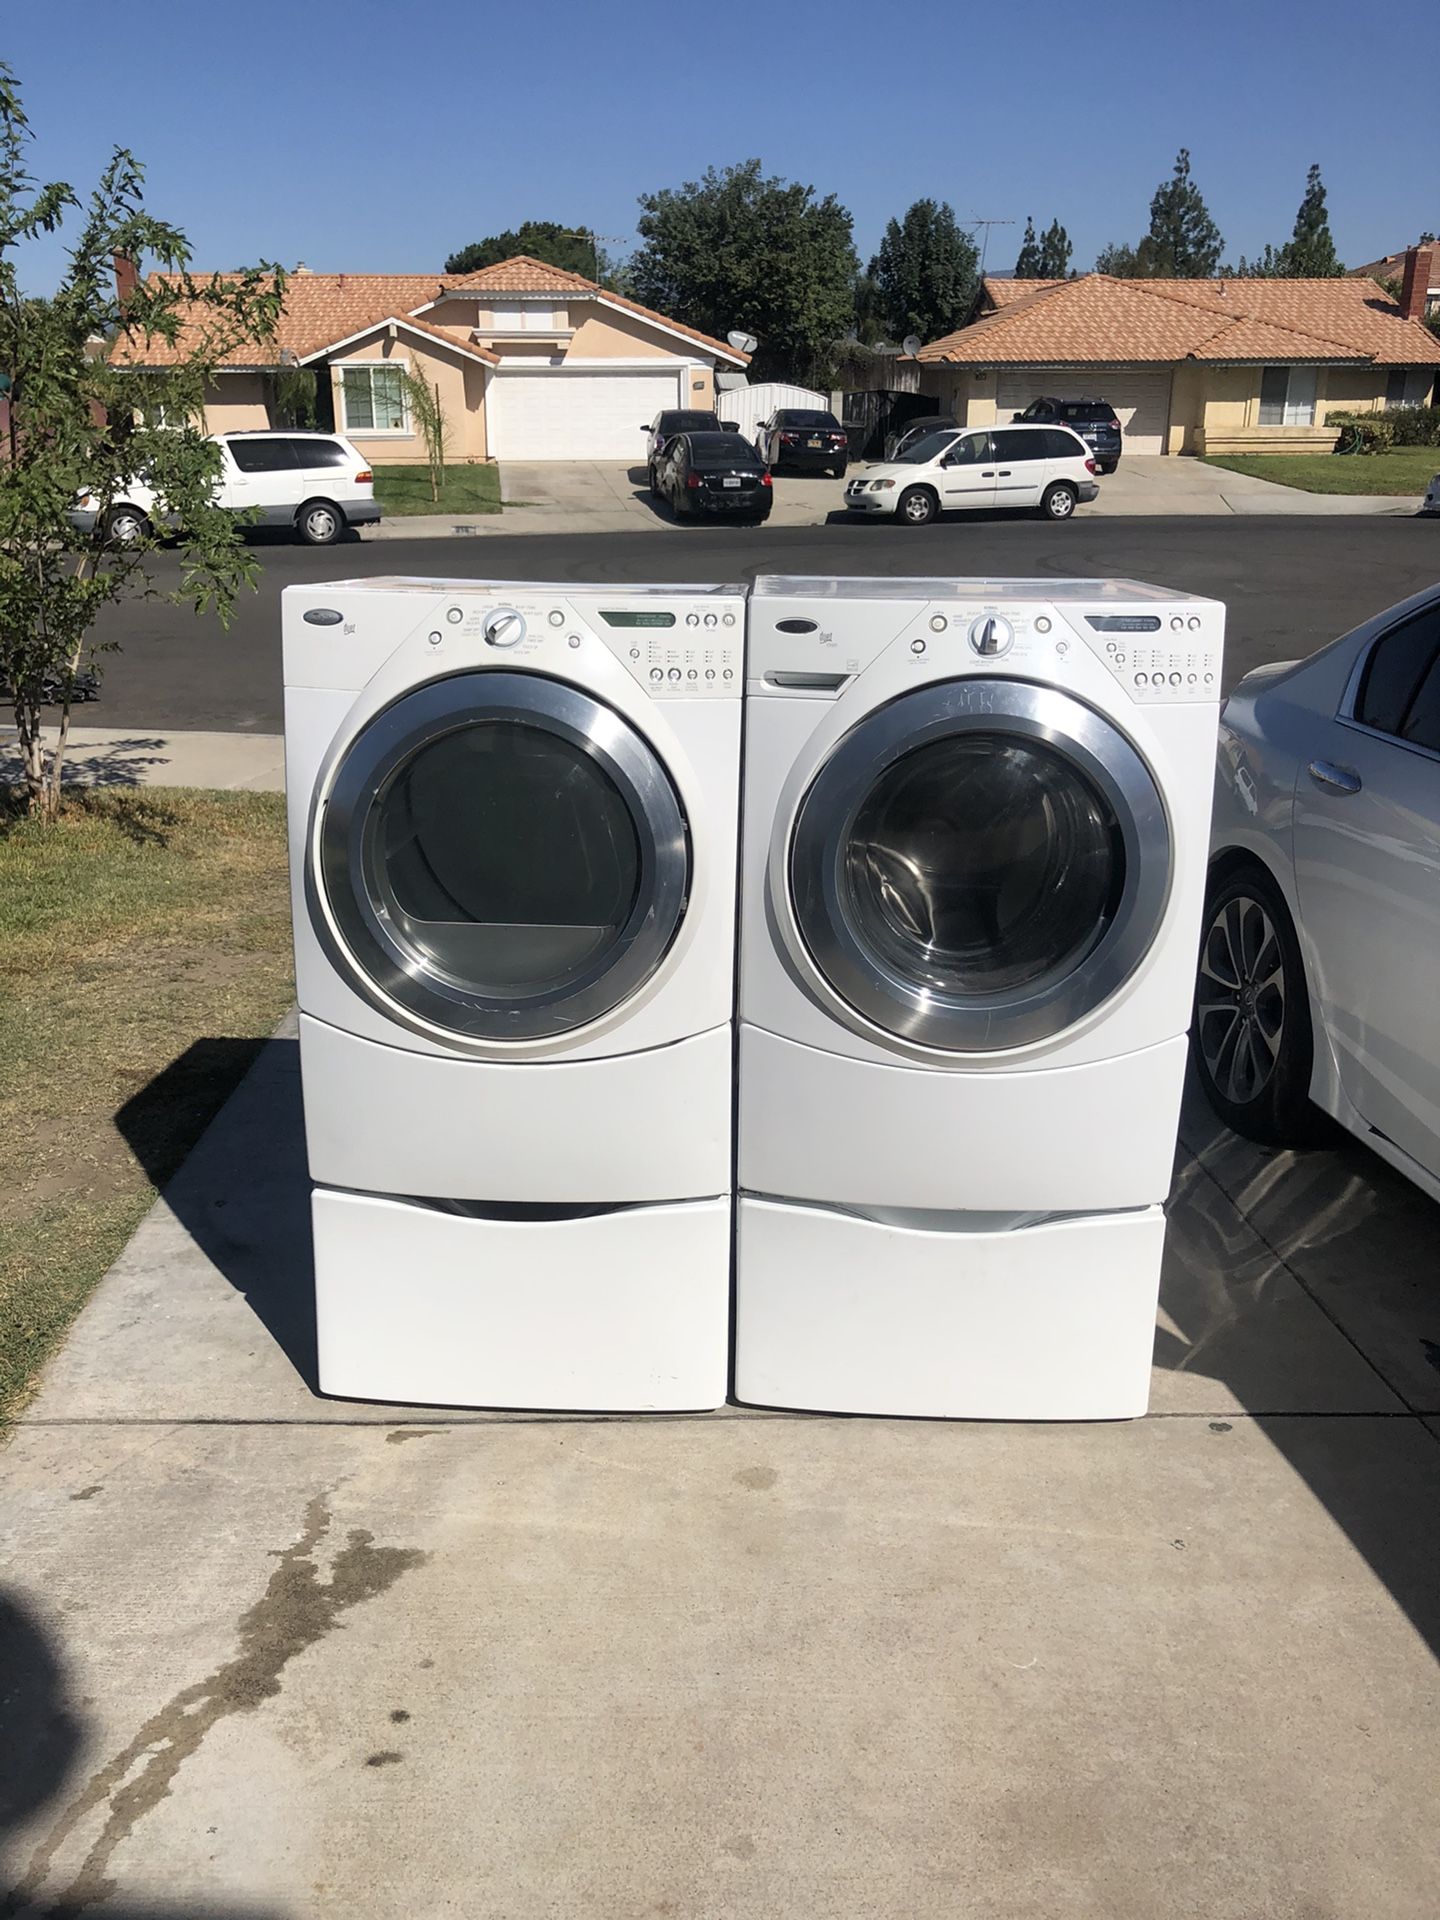 Whirlpool washer and dryer gas heavy duty super capacity plus good condition deliver and installation available